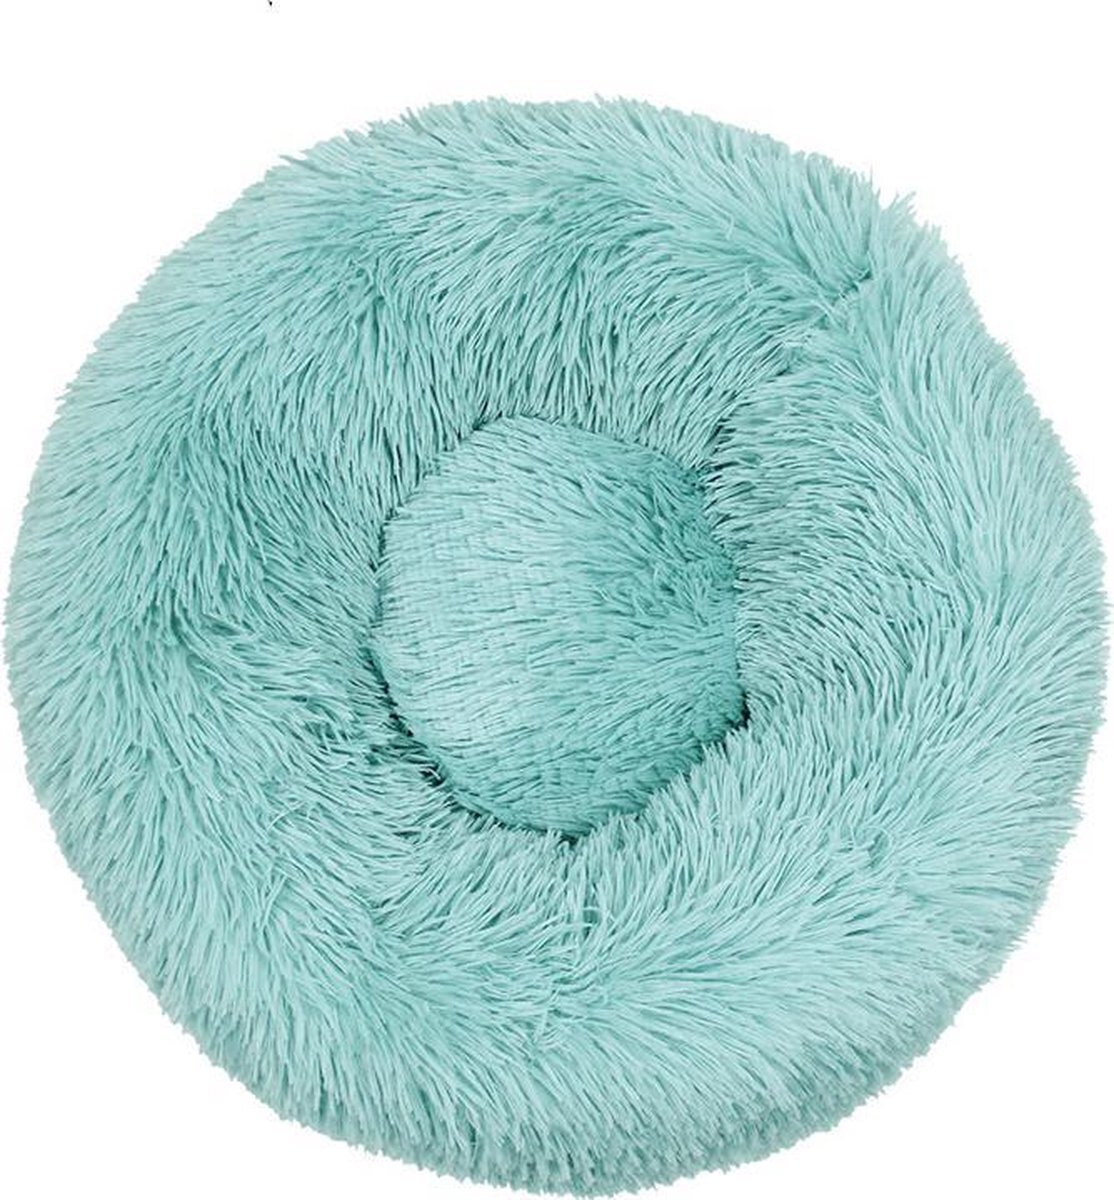 BEESSIES BEESSIES® donut hondenmand/kattenmand 60 cm - wasbare hoes - mint blauw - huisdierbed hond kat mand